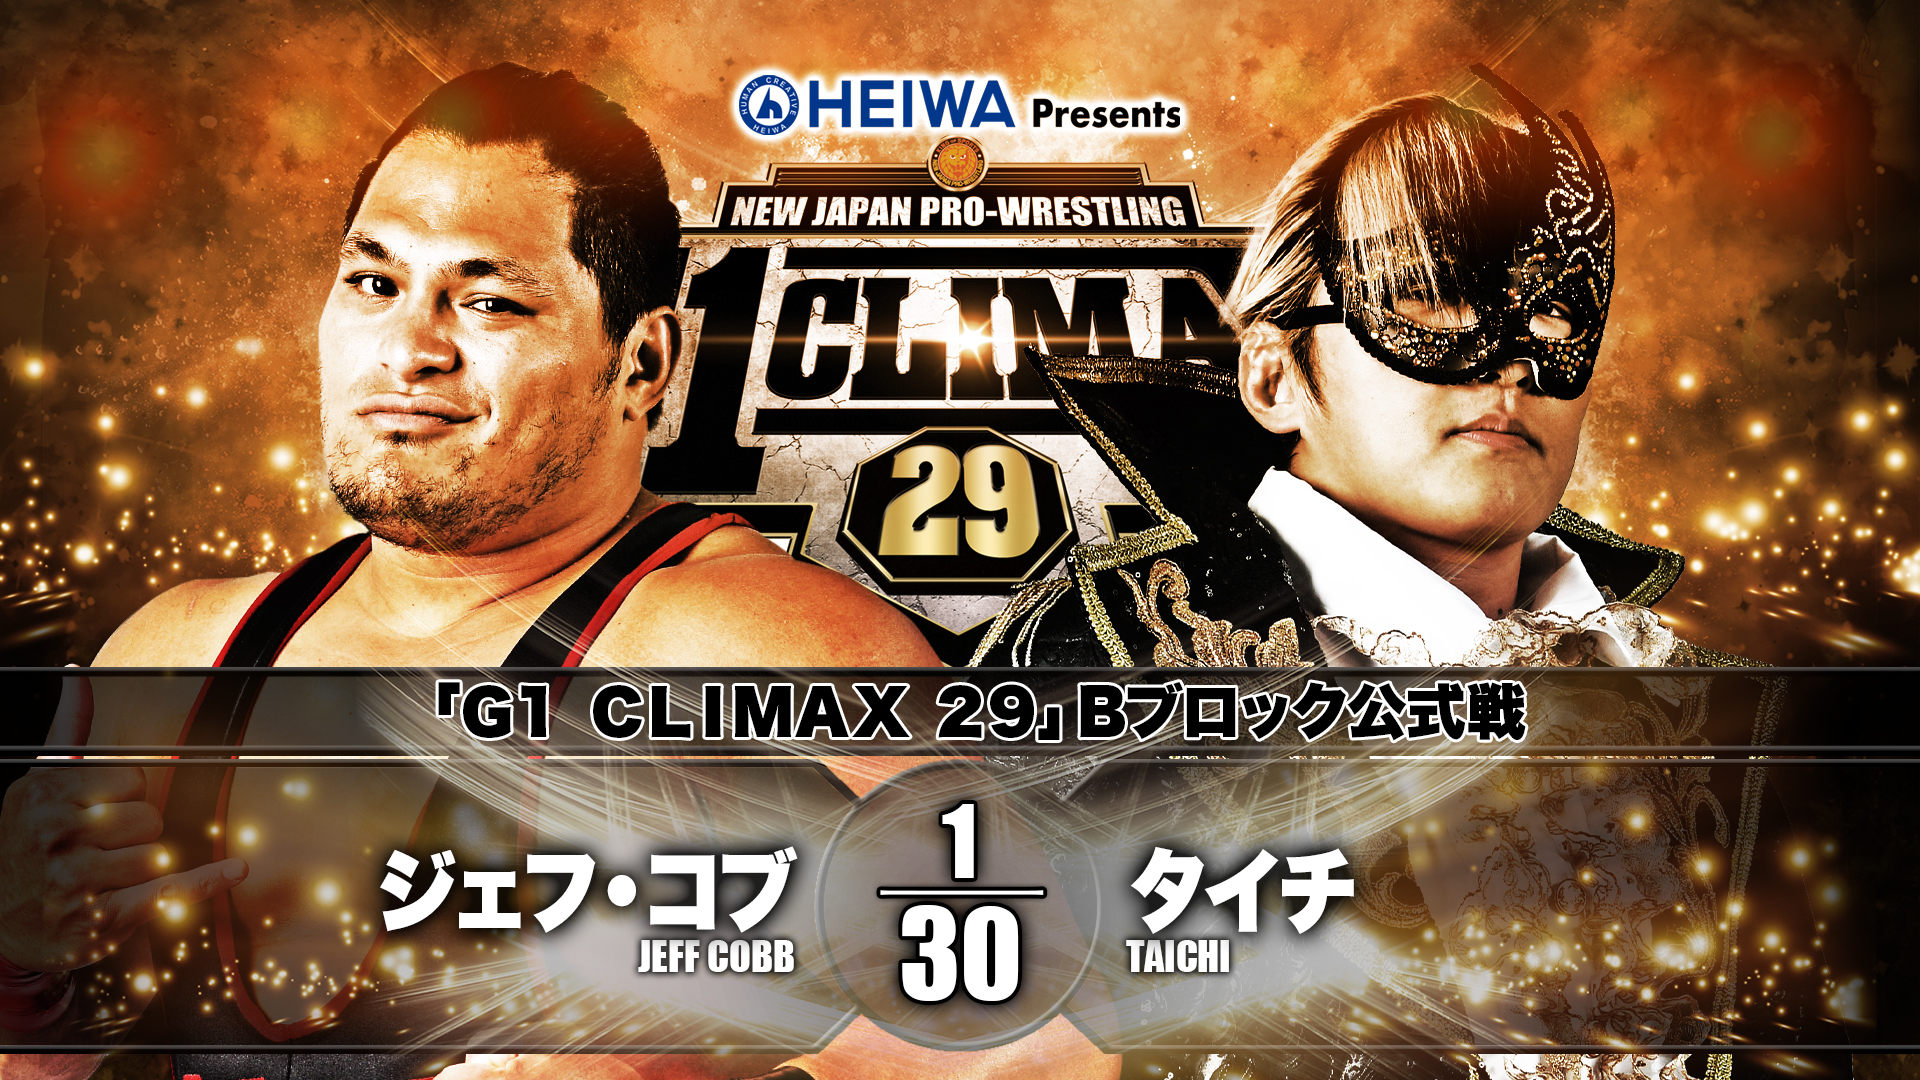 G1 Climax 29 night 10 at a glance 【G129】 | NEW JAPAN PRO-WRESTLING